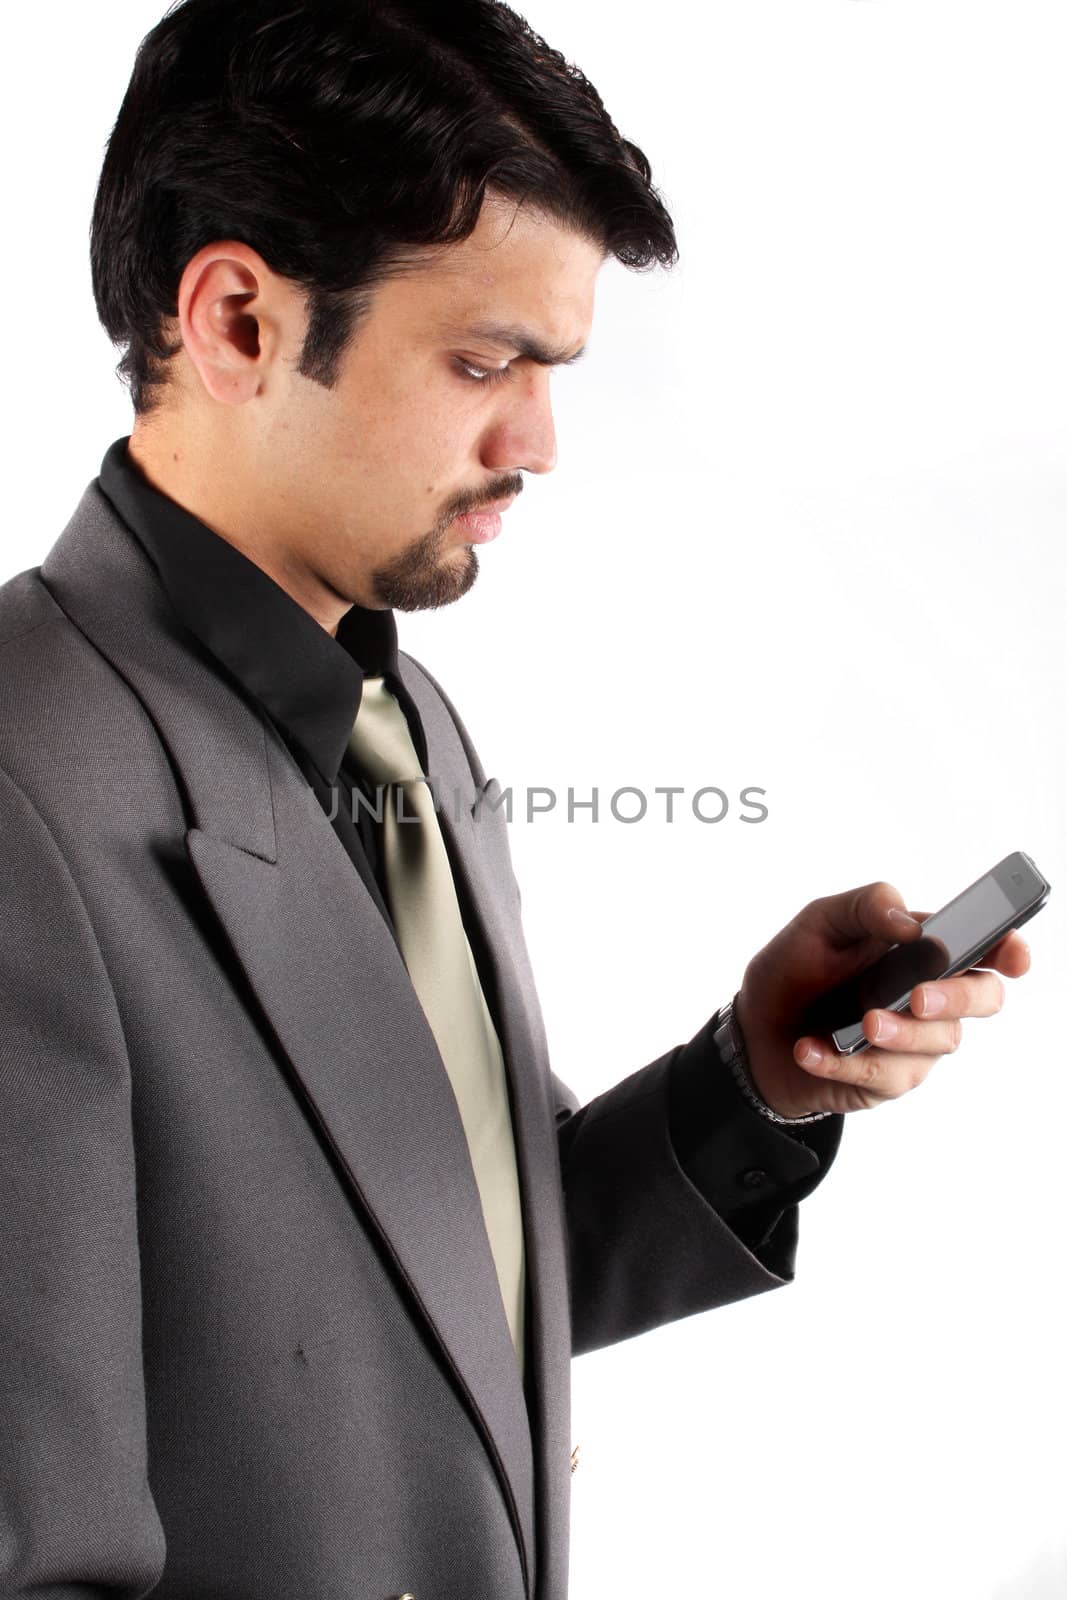 An Indian businessman checking his cellphone, on white studio background.